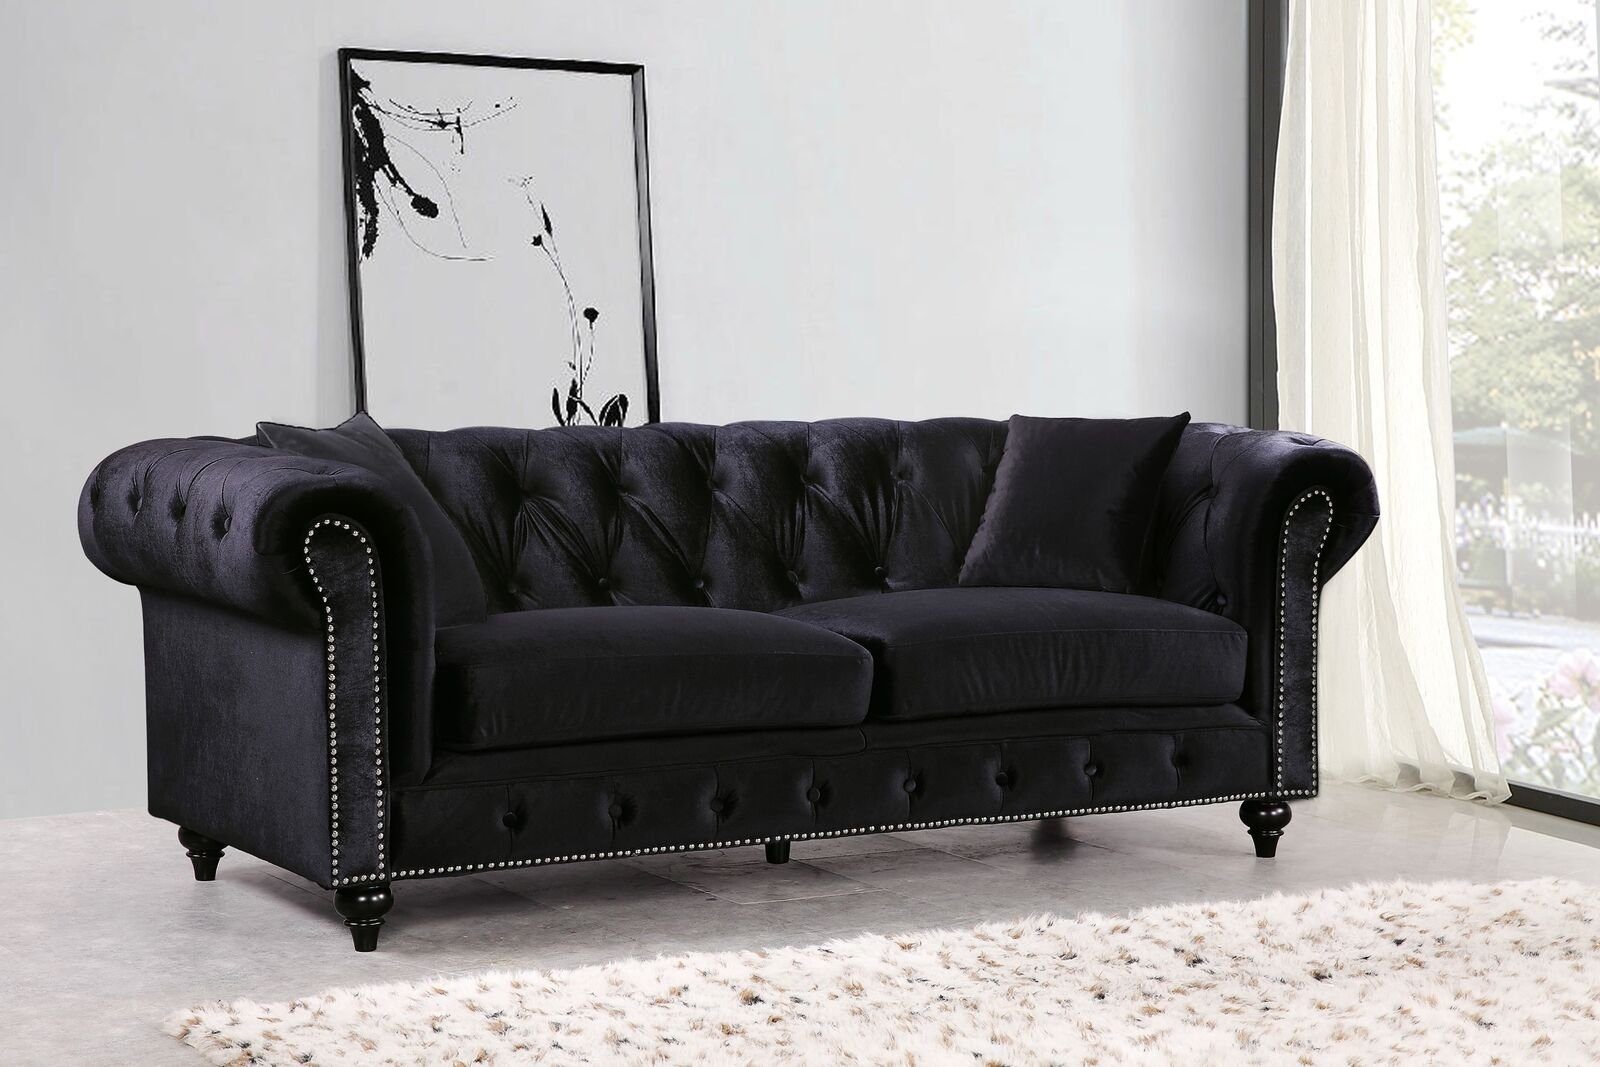 Design JVmoebel Luxus Chesterfield-Sofa, Chesterfield Polster Couch Sofa